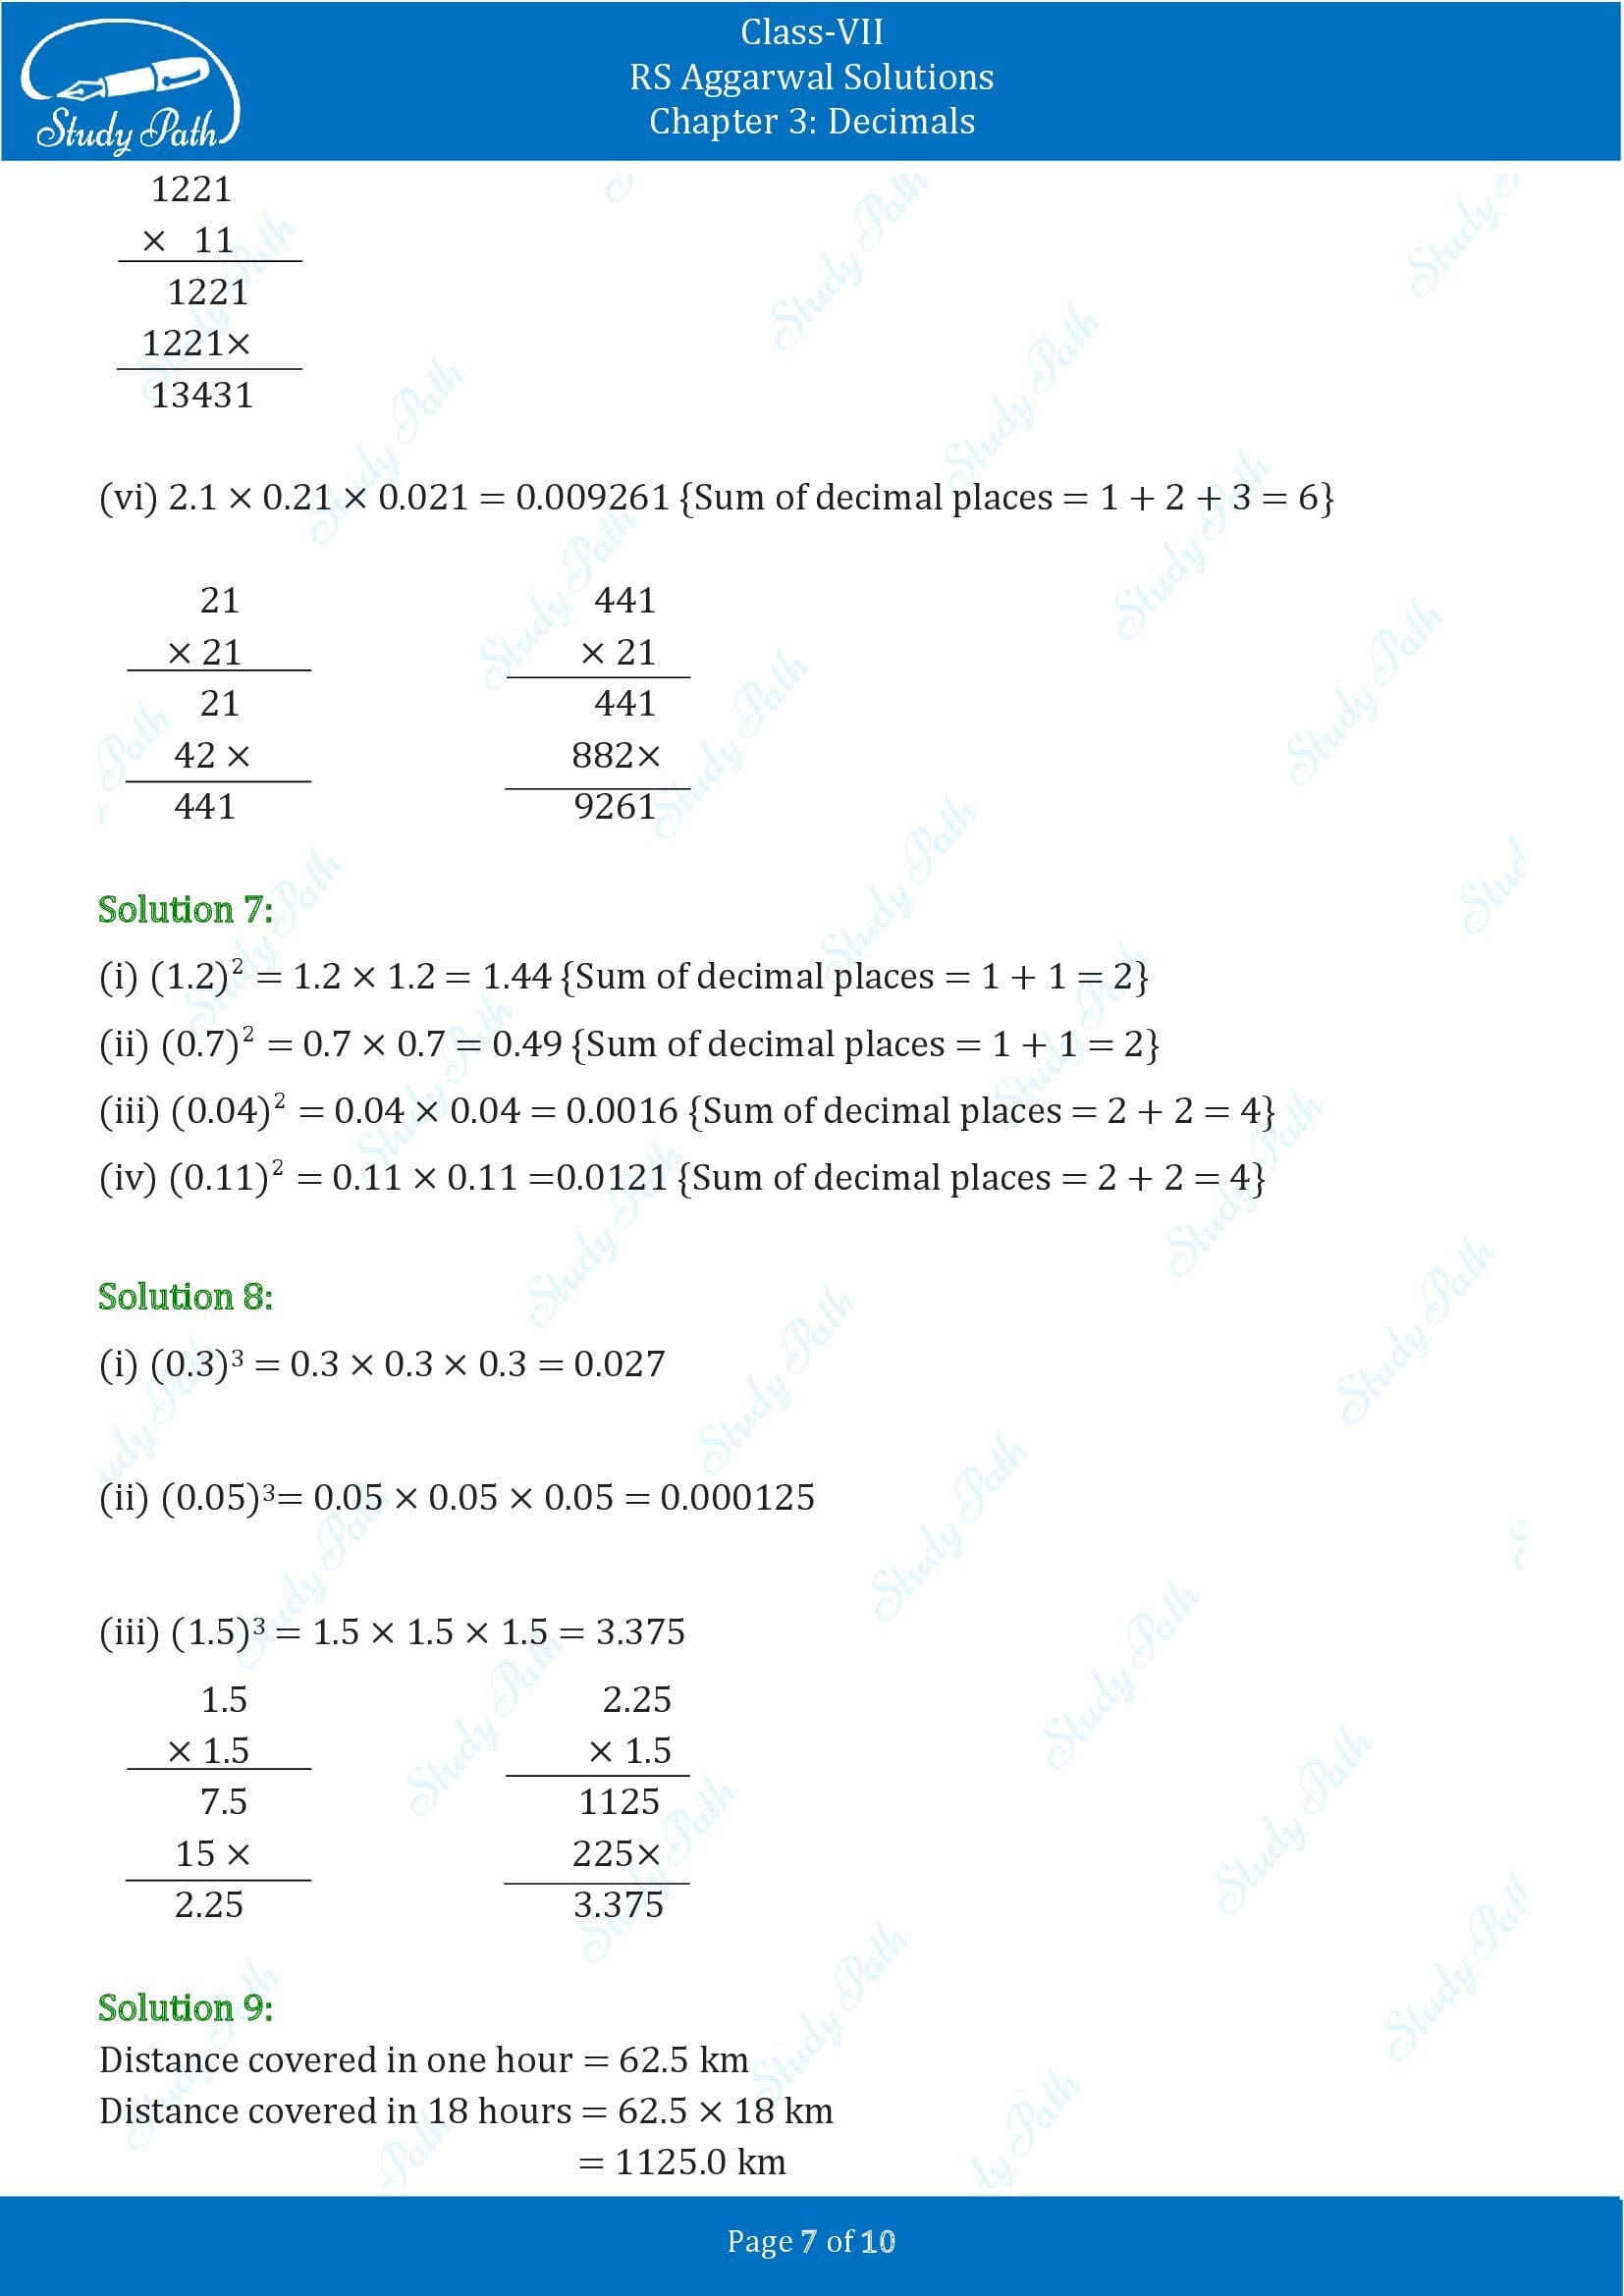 RS Aggarwal Solutions Class 7 Chapter 3 Decimals Exercise 3C 007